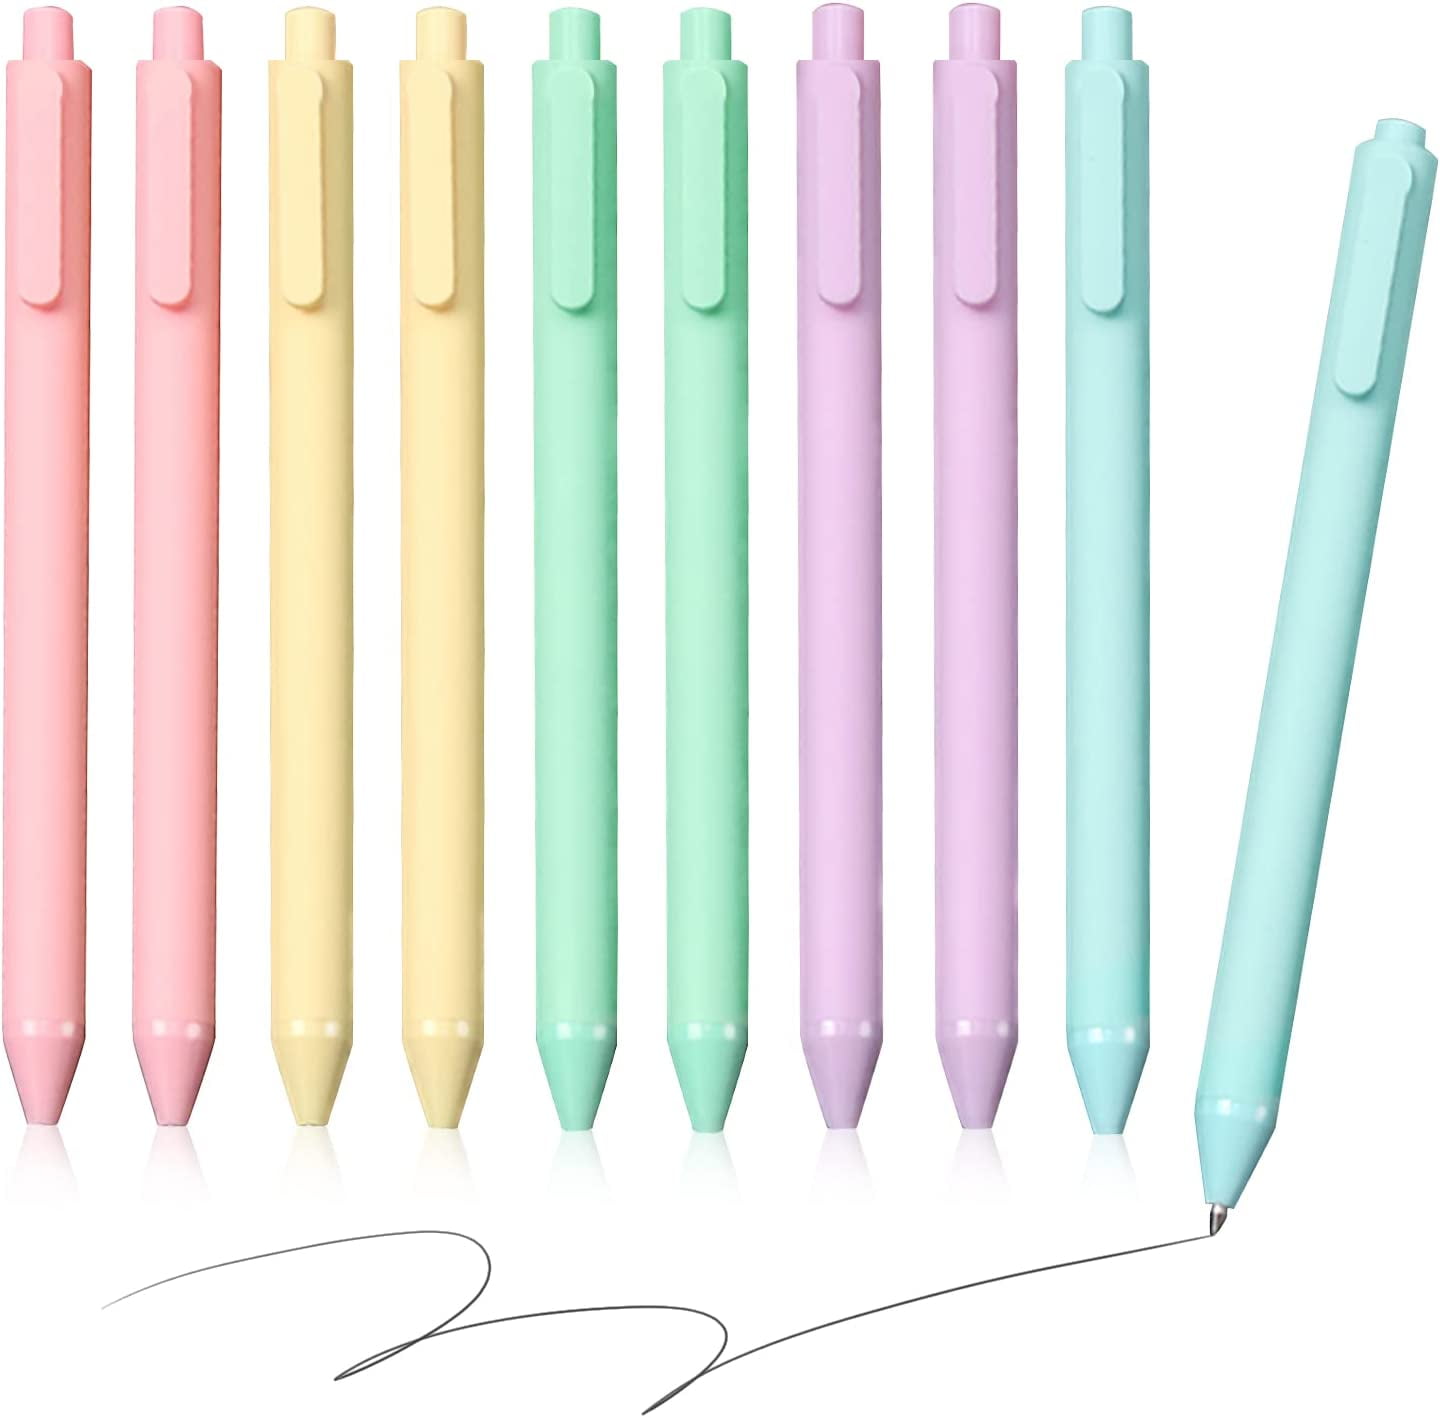 Sksloeg Retractable Ballpoint Pens, Cute Retractable Pens for Note Taking,  10-Count Pack, Gift Pens for Smooth Writing, Pens with Super Soft Grip Ball